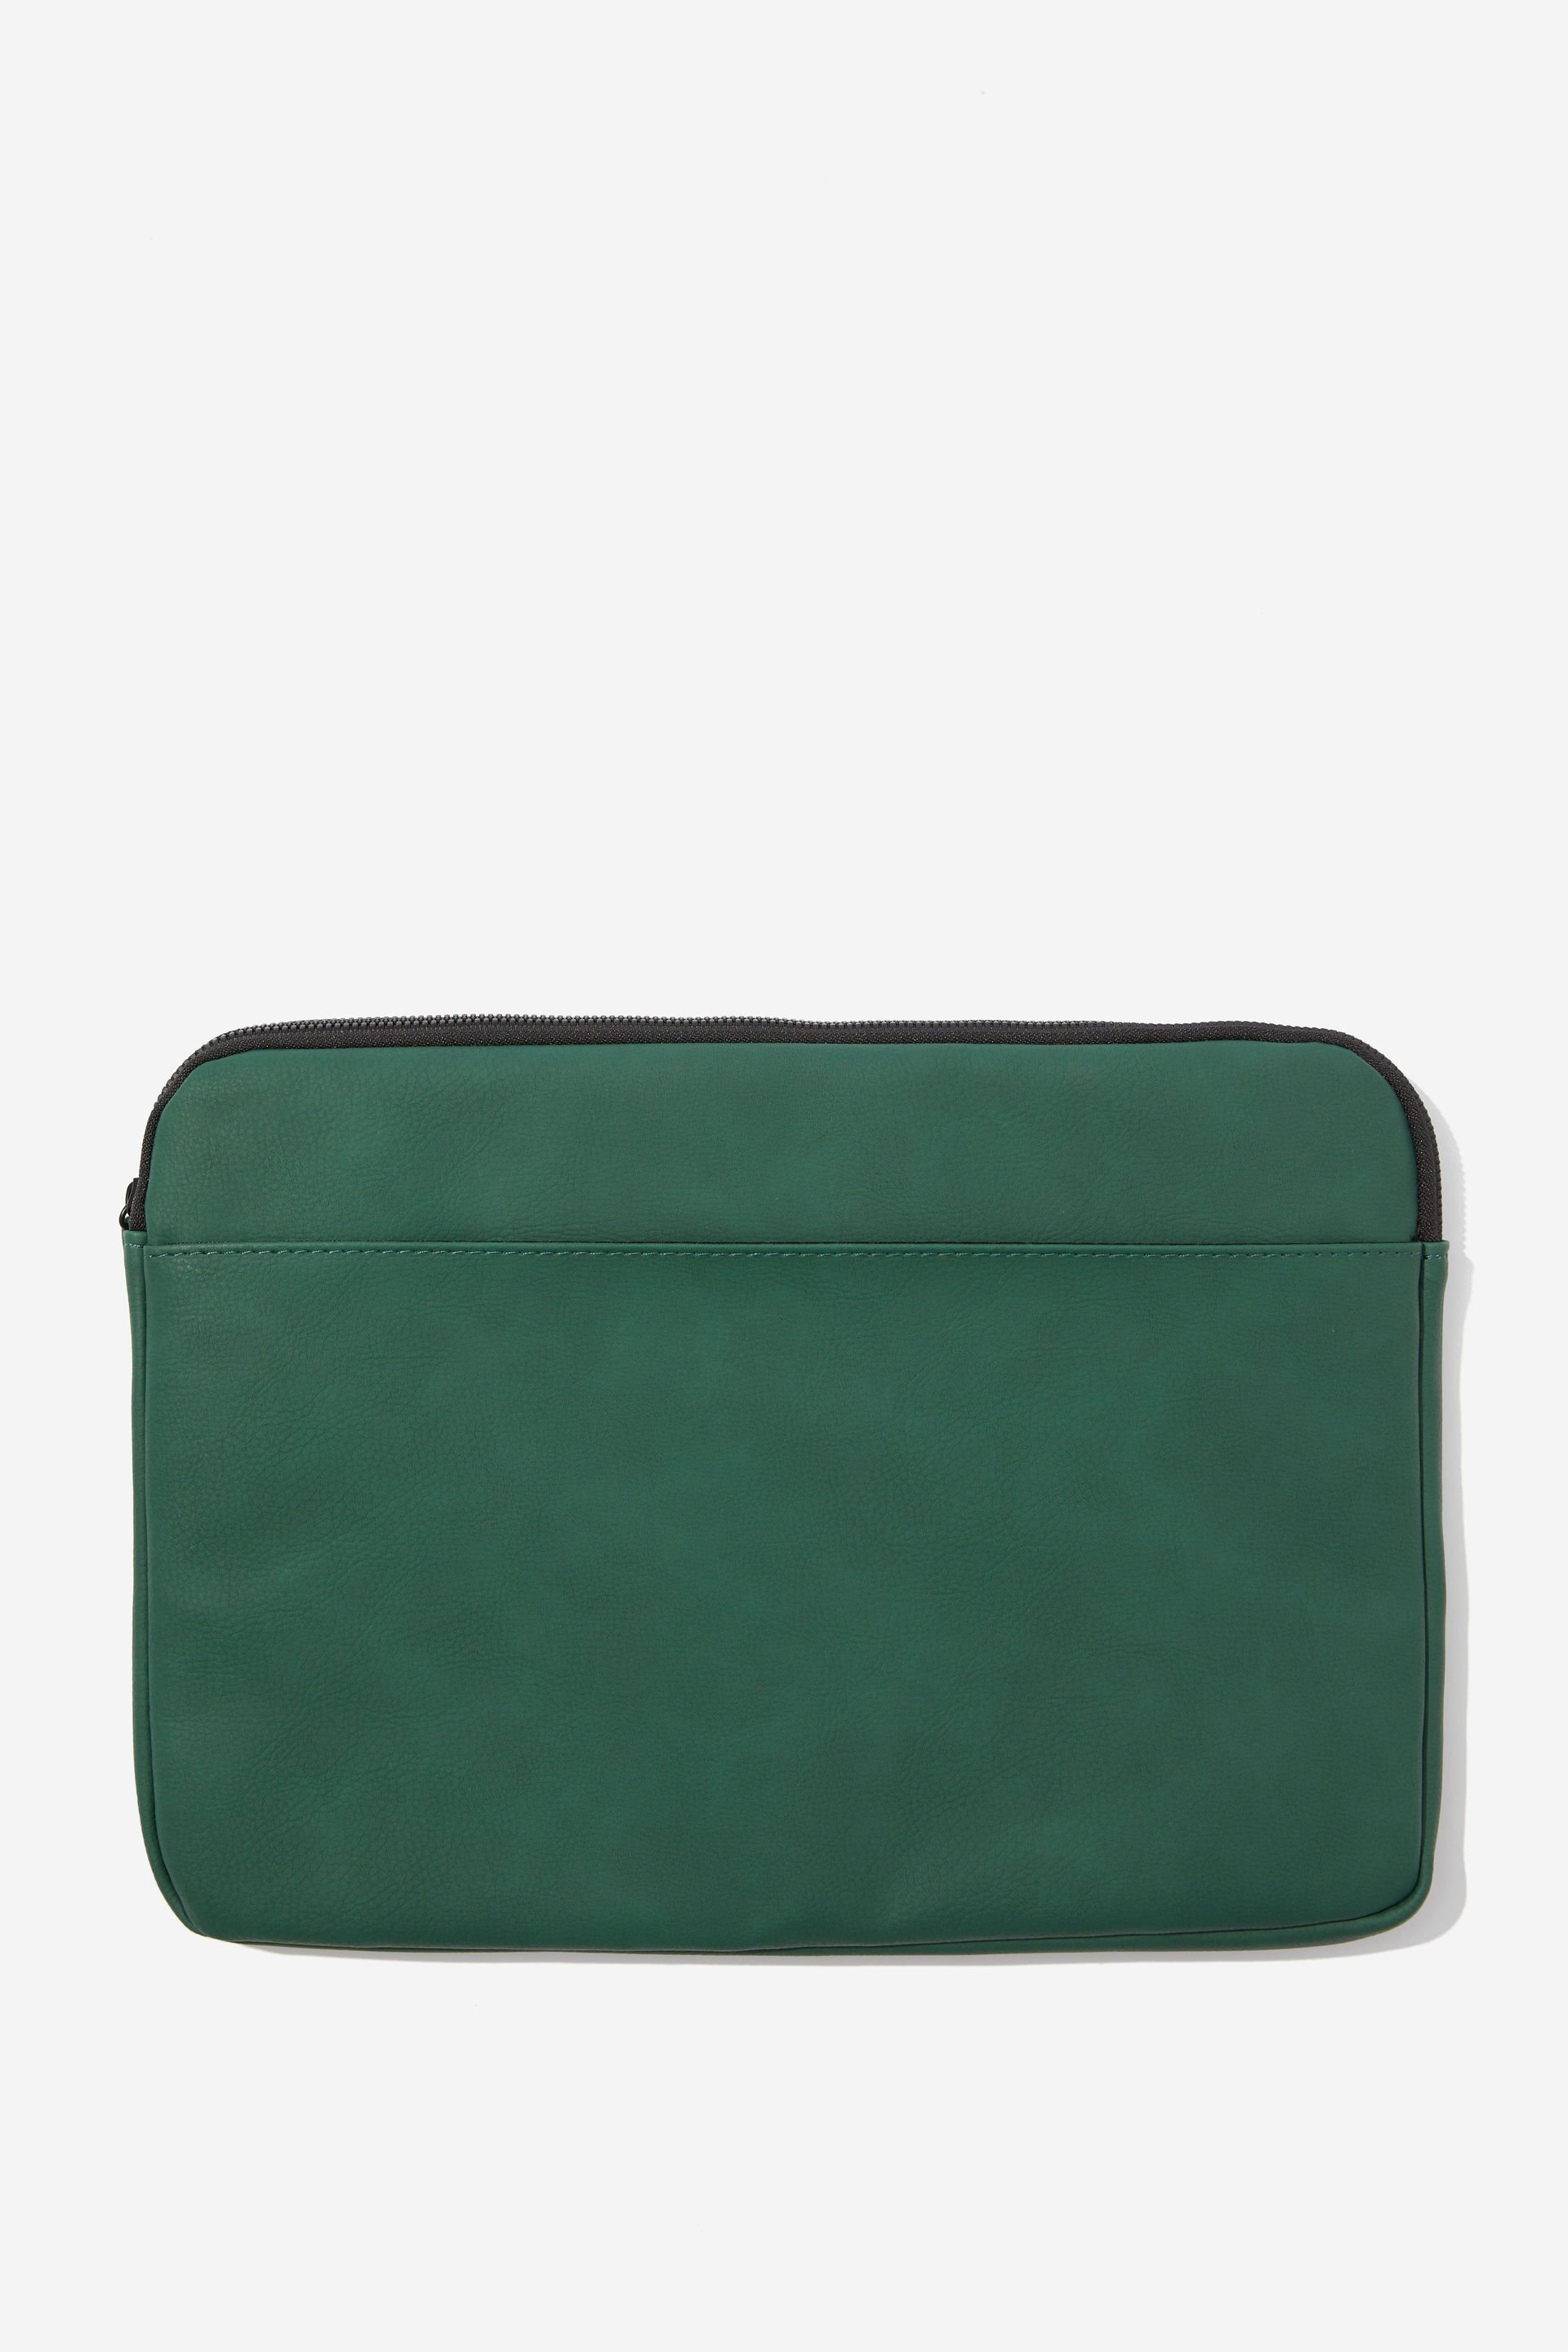 Typo - Core Laptop Cover 13 Inch - Heritage green